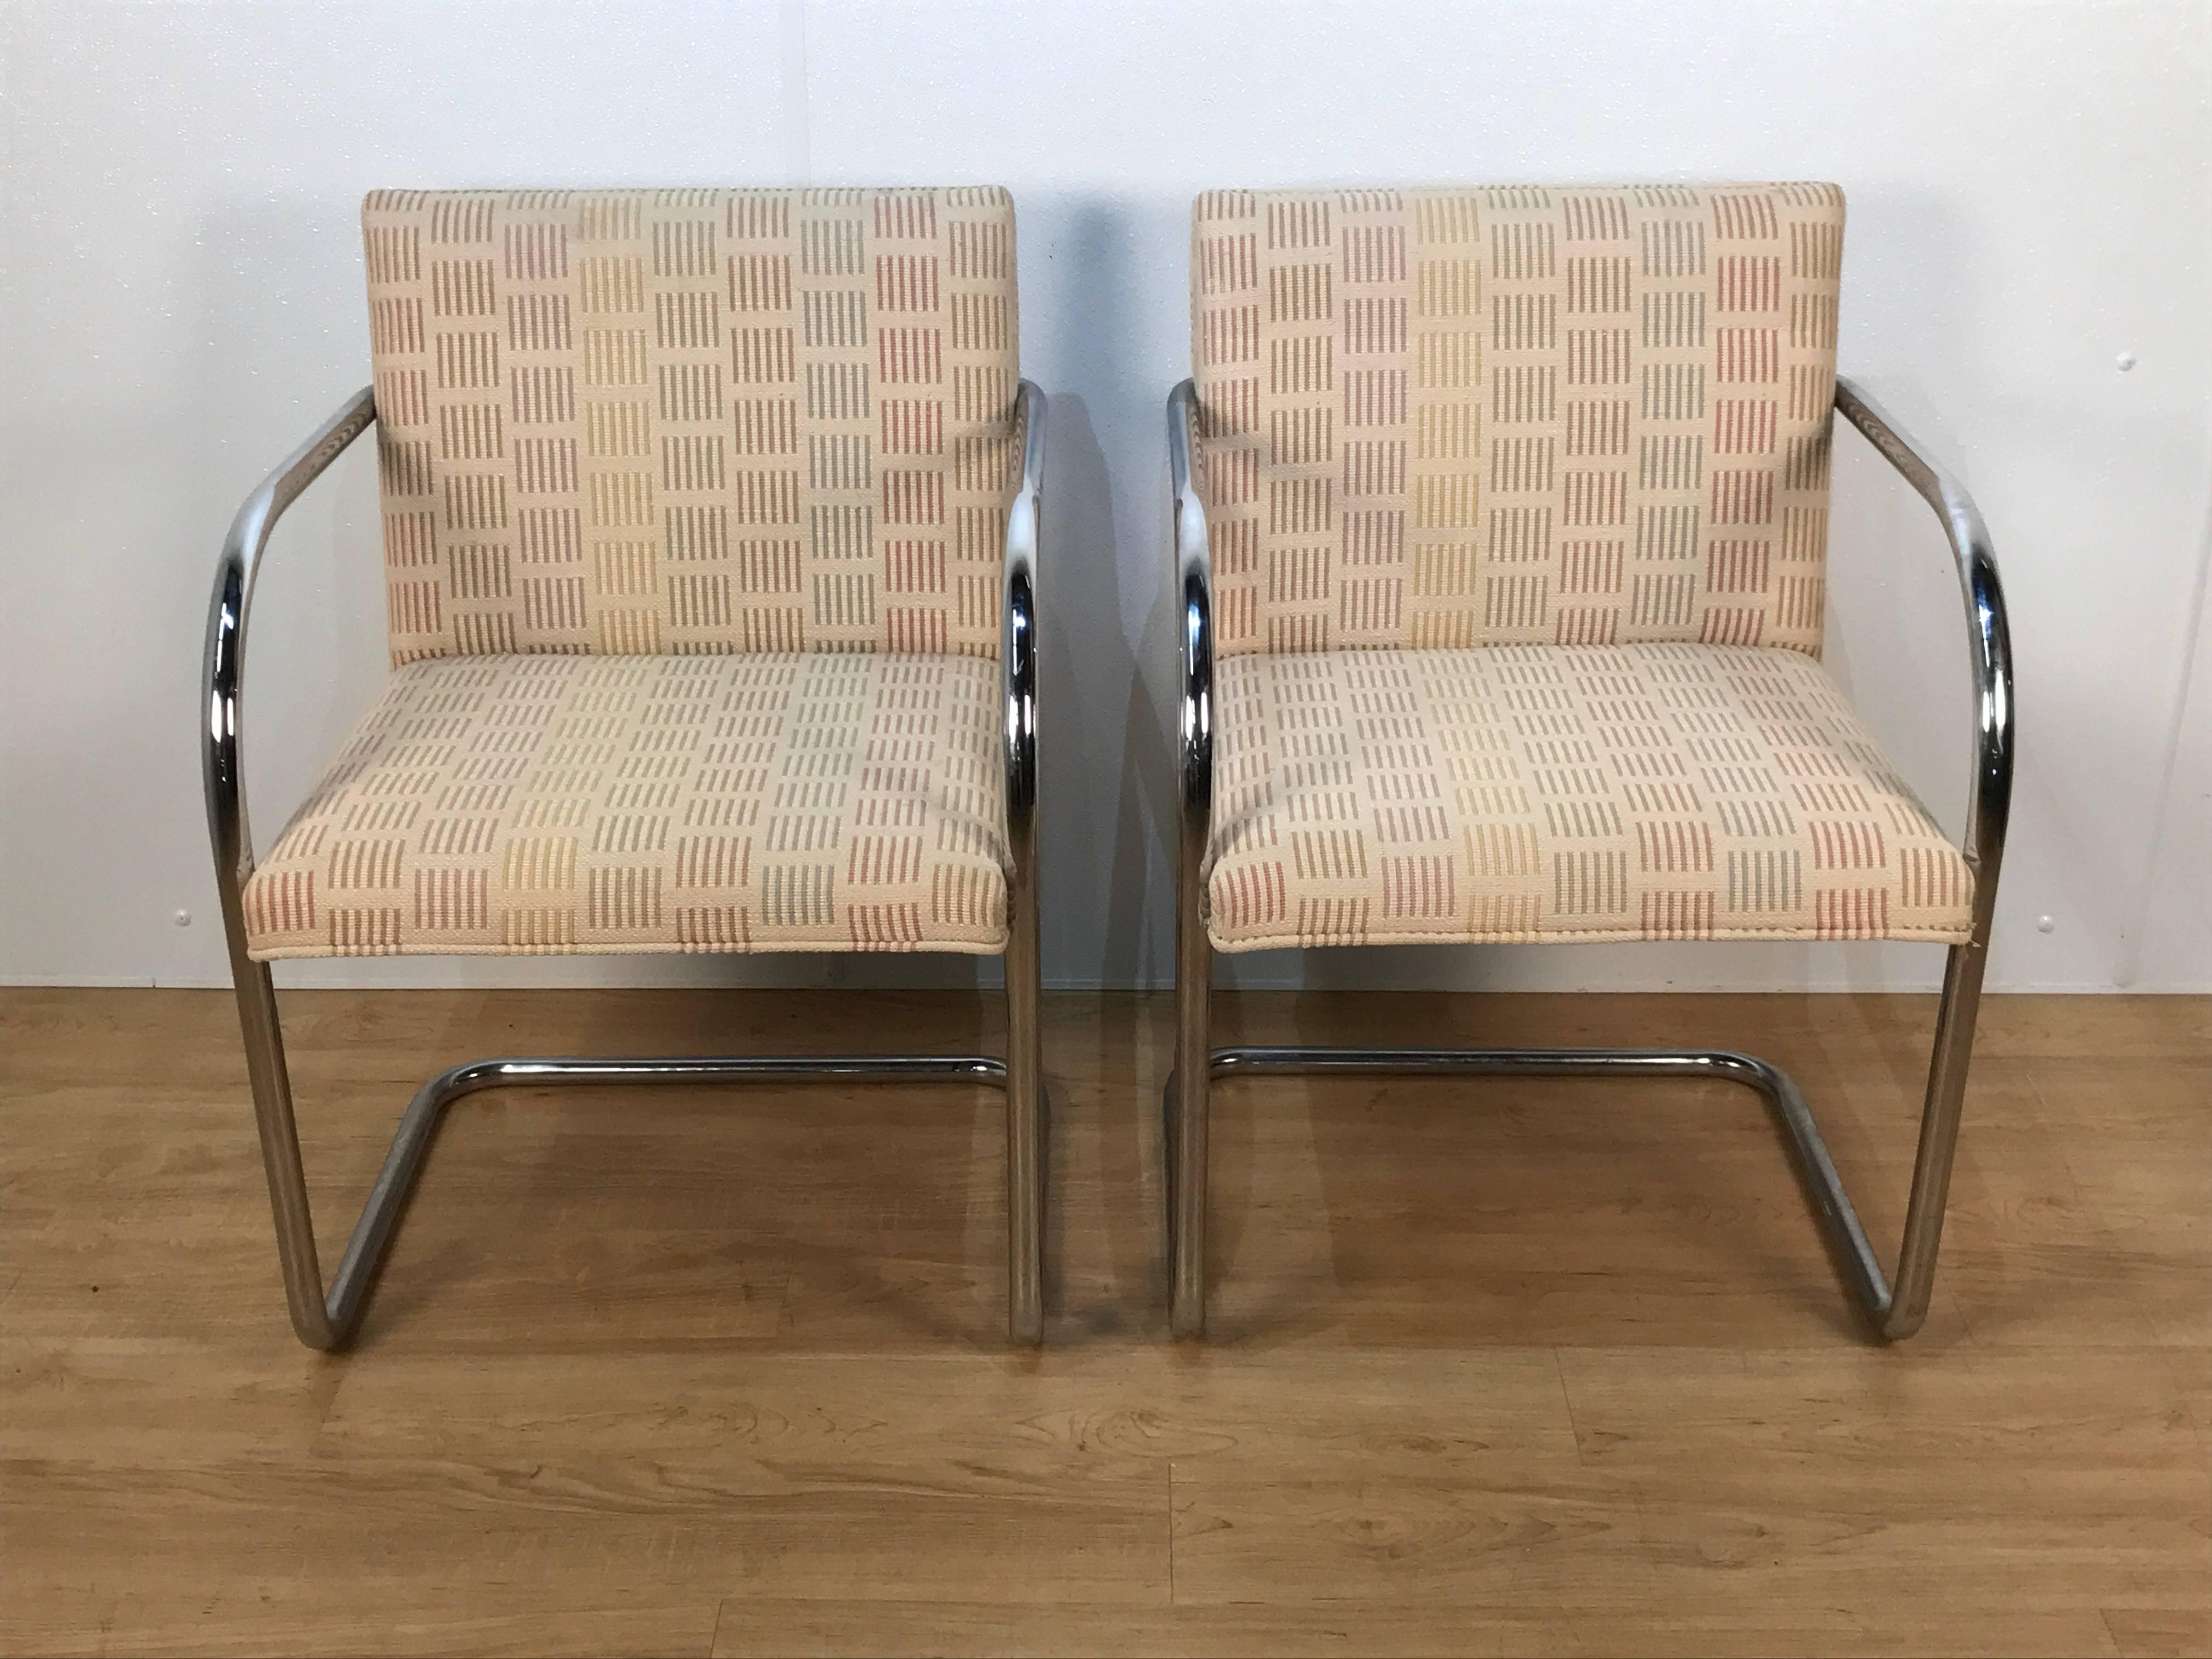 Eight midcentury Brono tubular chairs, designed by Ludwig Mies van der Rohe, each one with tubular chrome steel cantilevered frames and vintage upholstery
Originally designed by Mies van der Rohe for his Tugendhat House in Brno, Czech Republic, in